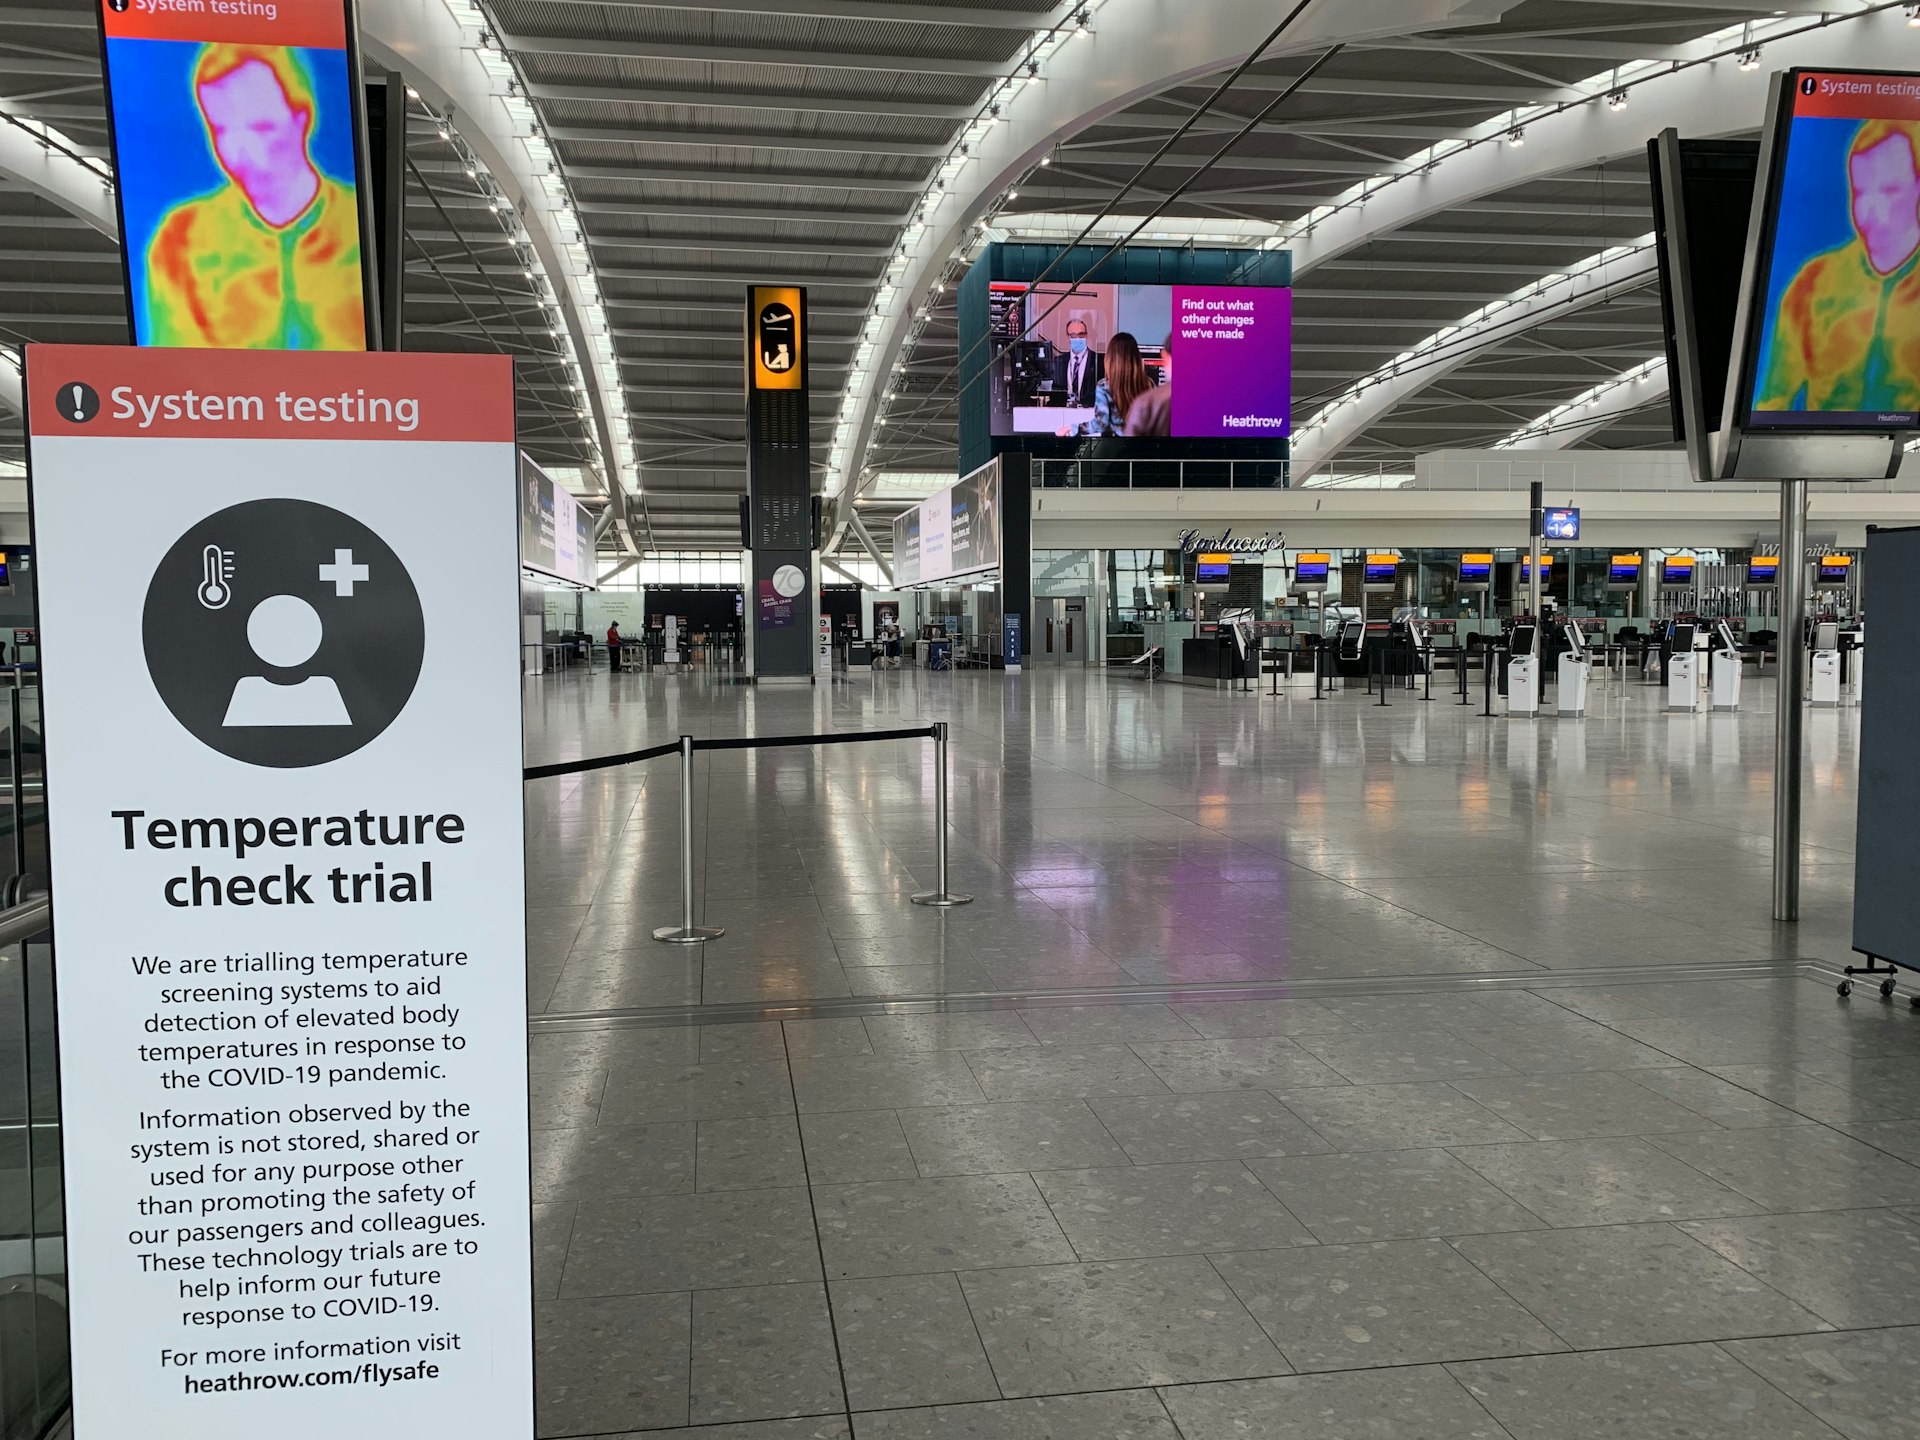 IN_Check-in area at LHR Terminal 5.jpg